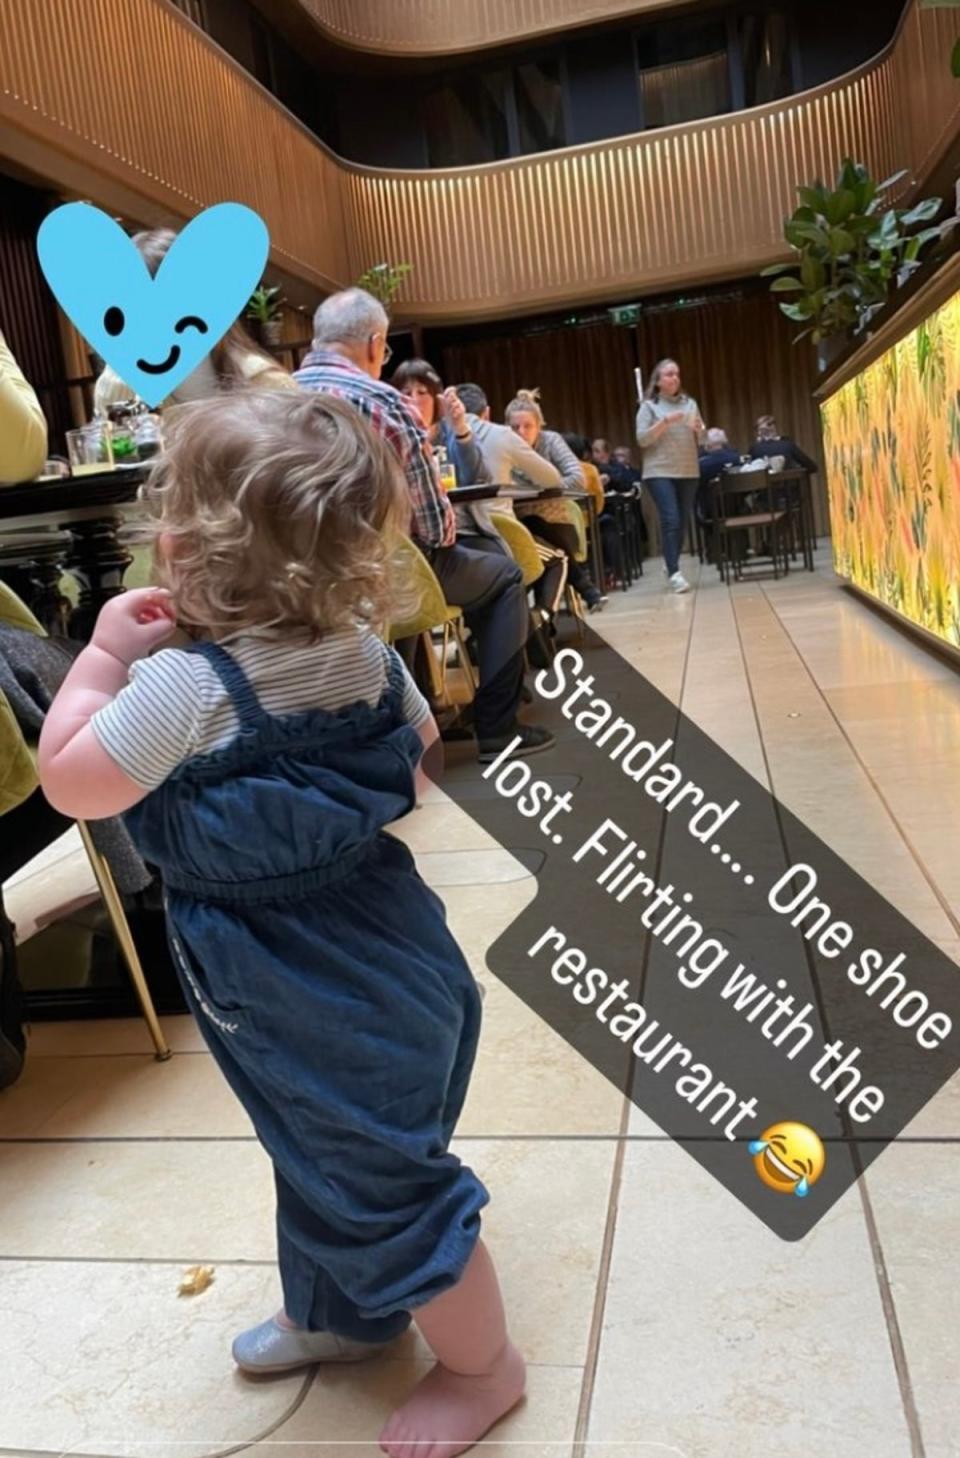 Skelton dined with daughter Eloise at Westfield mall on Sunday after hosting a KidZania event (instagram/Helen Skelton)